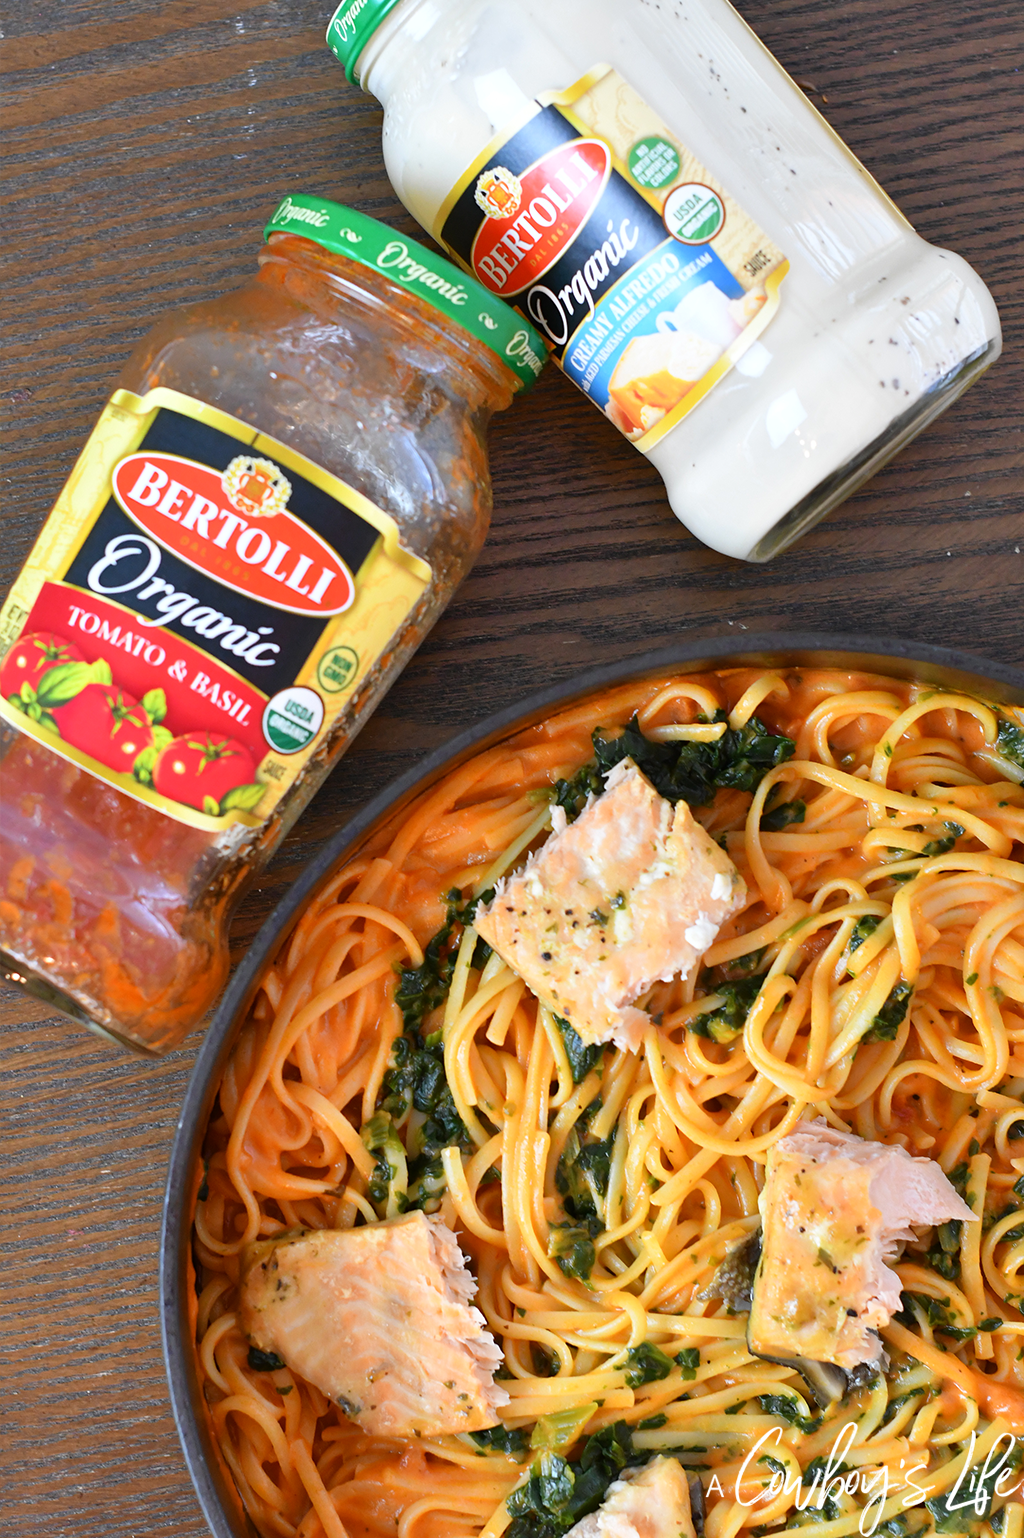 Creamy Salmon Spinach Pasta | Salmon Pasta | Spinach Pasta | Easy Pasta Dinner | Family Dinner | Seafood Pasta #salmonpasta #pastadinner #creamypasta